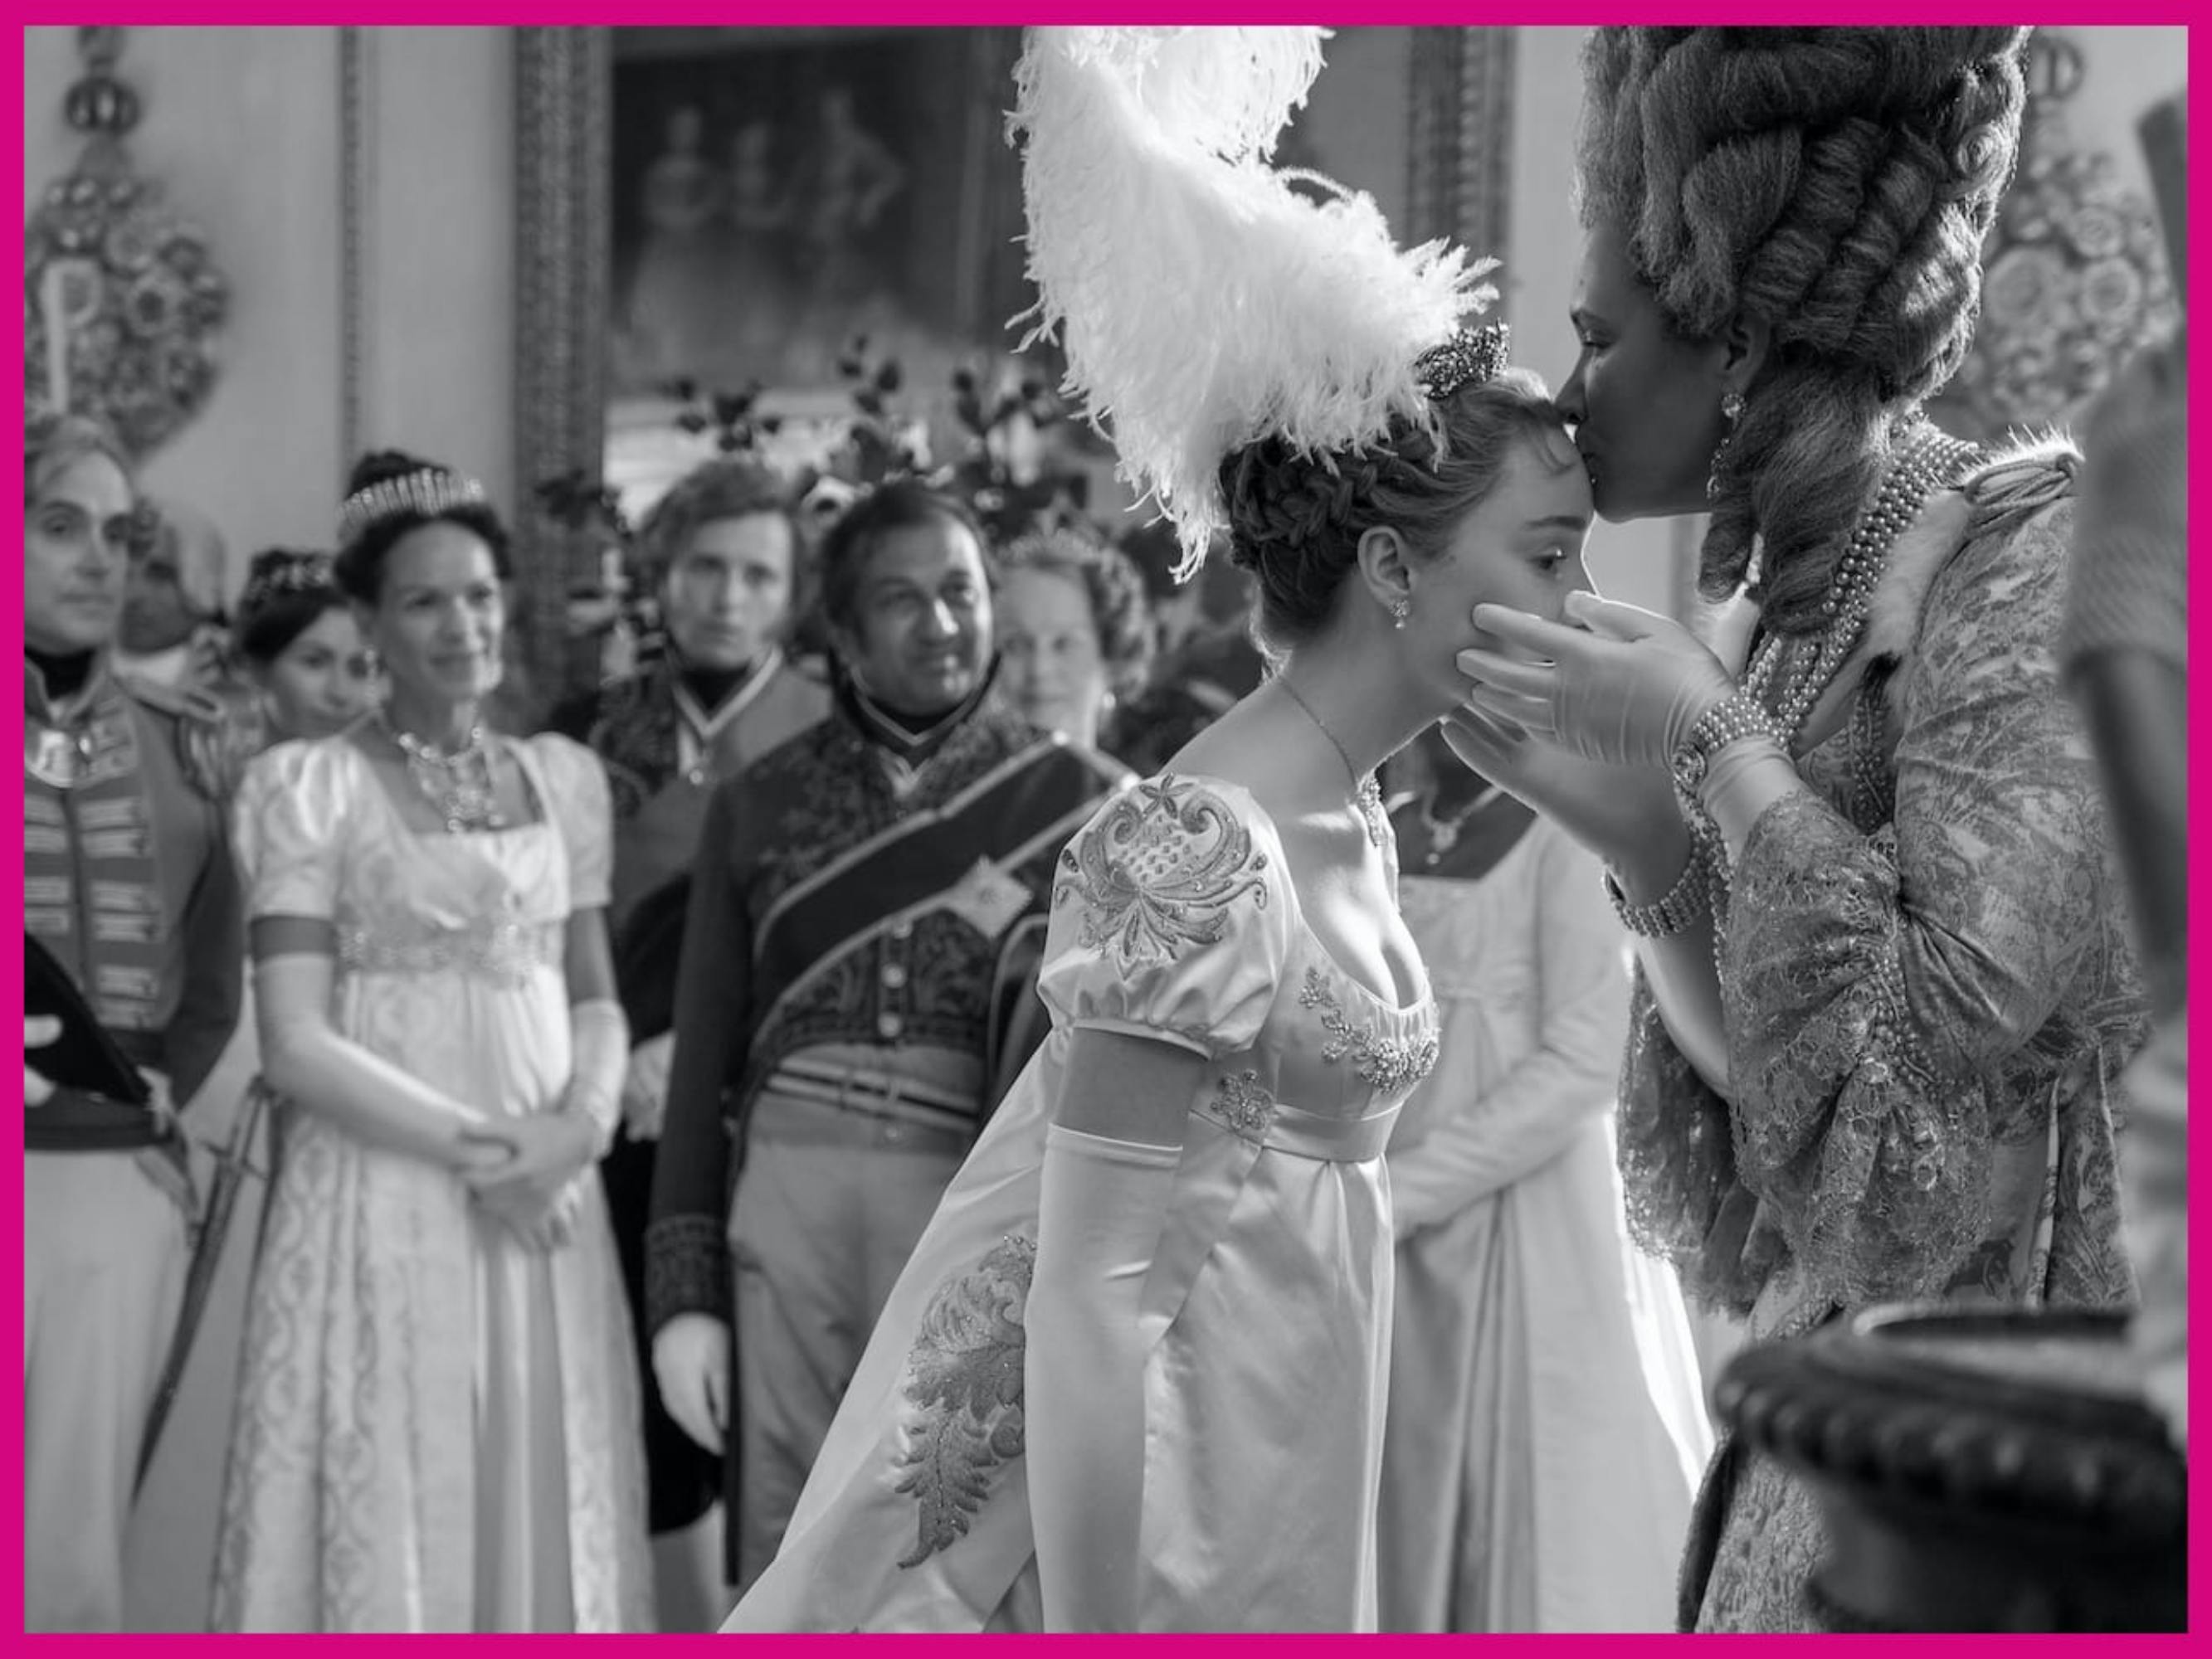 Daphne Bridgerton (Phoebe Dynevor) and Queen Charlotte (Golda Rosheuvel) embrace amidst a group of people. Queen Charlotte kisses Daphne’s forehead. The women are decked in shining dresses and gloves, and Daphne wears an impressive white plume atop her head.